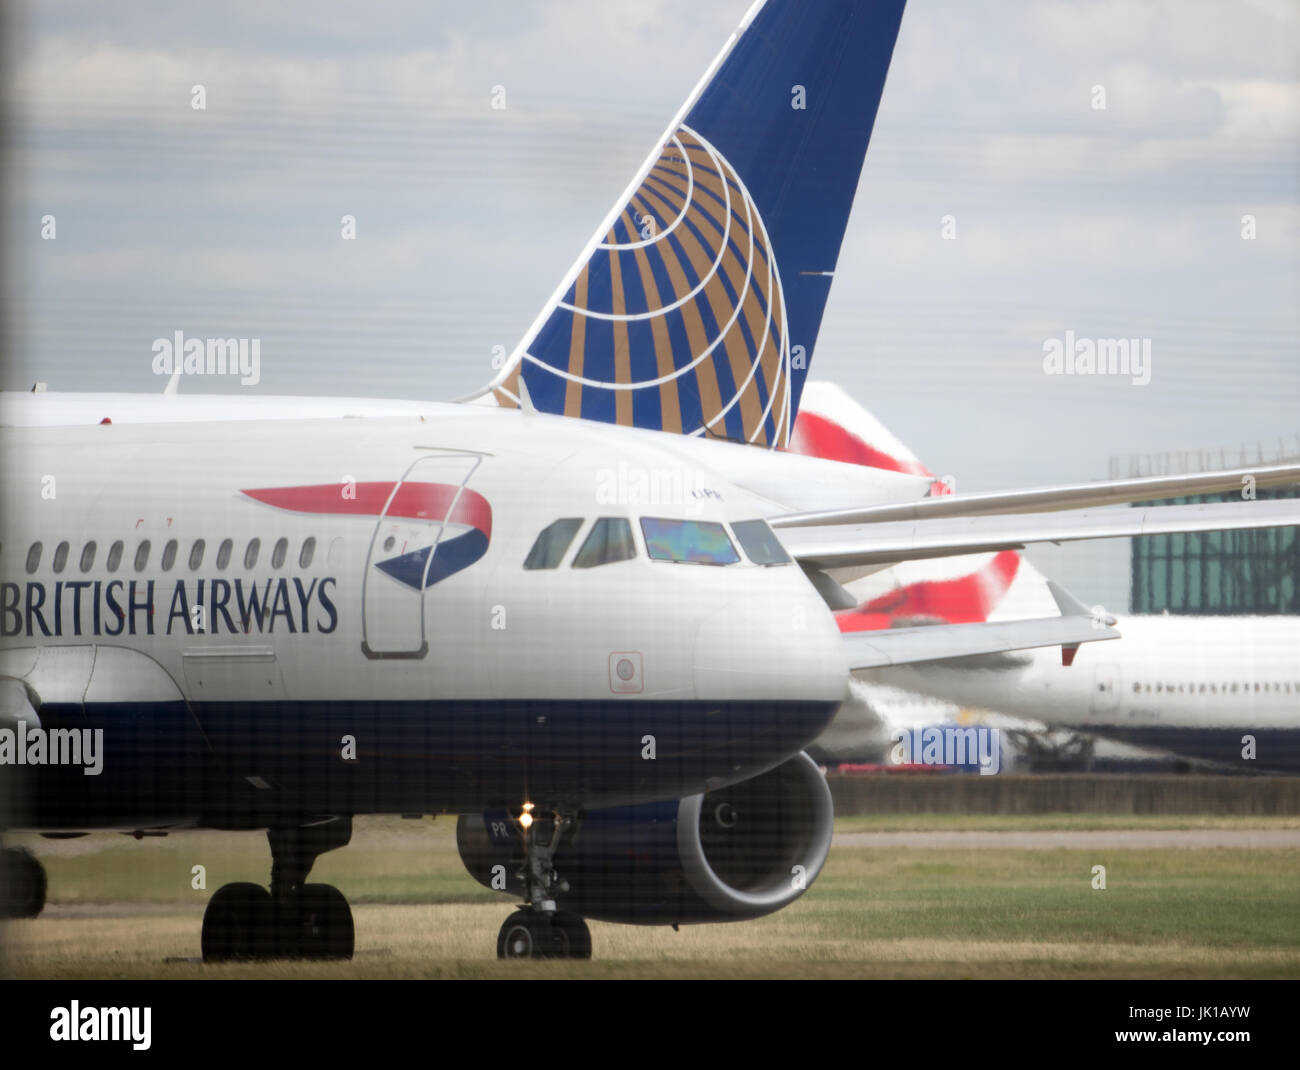 British Airways and United Airlines planes on the tarmac at London's Heathrow airport on the day when air traffic controllers are expected to handle a total of 8,800 planes across the country over 24 hours, making it the busiest day in UK aviation history. Stock Photo